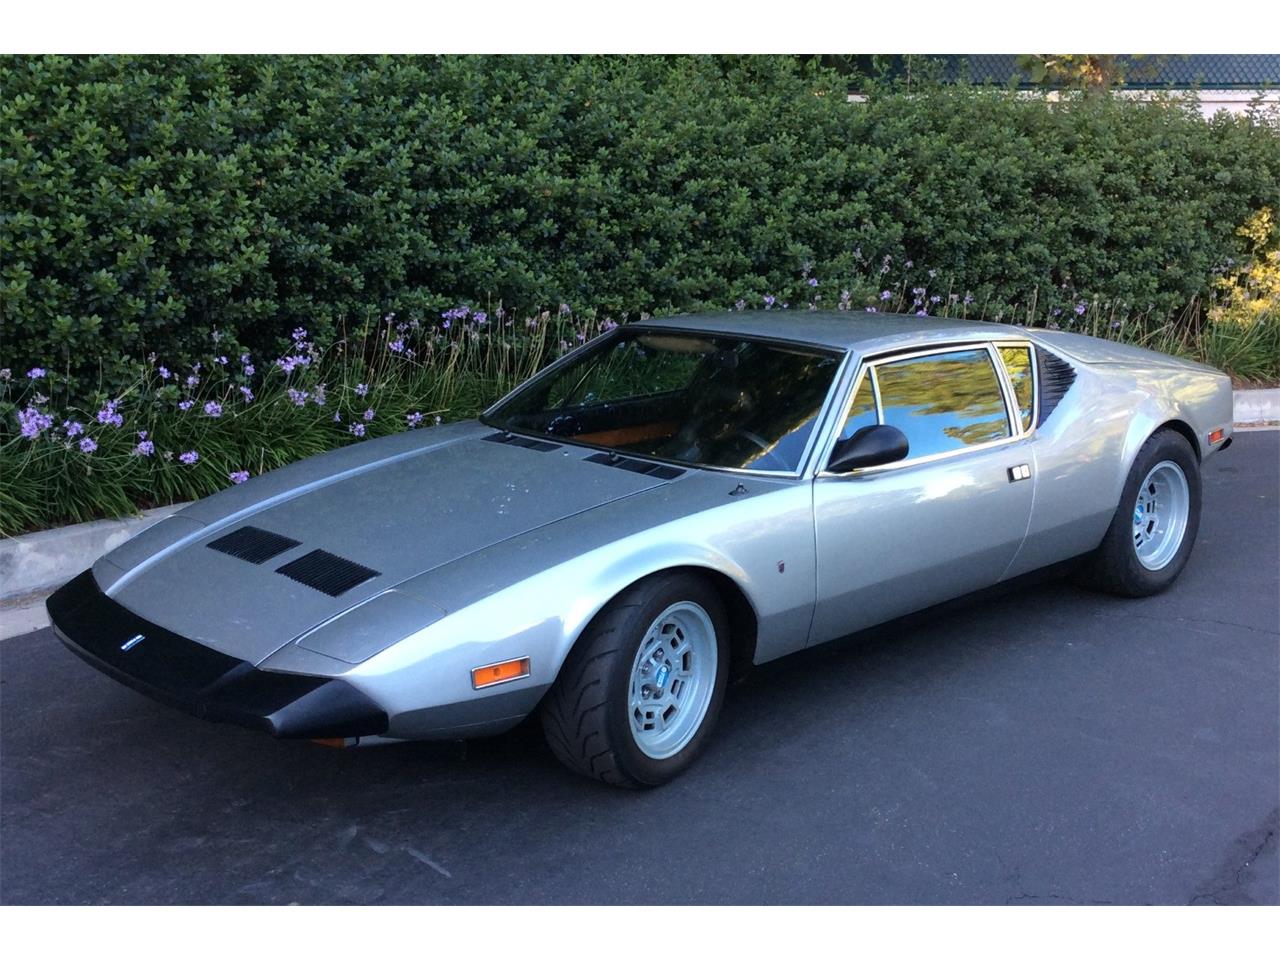 For Sale at Auction: 1973 De Tomaso Pantera for sale in Other, Other